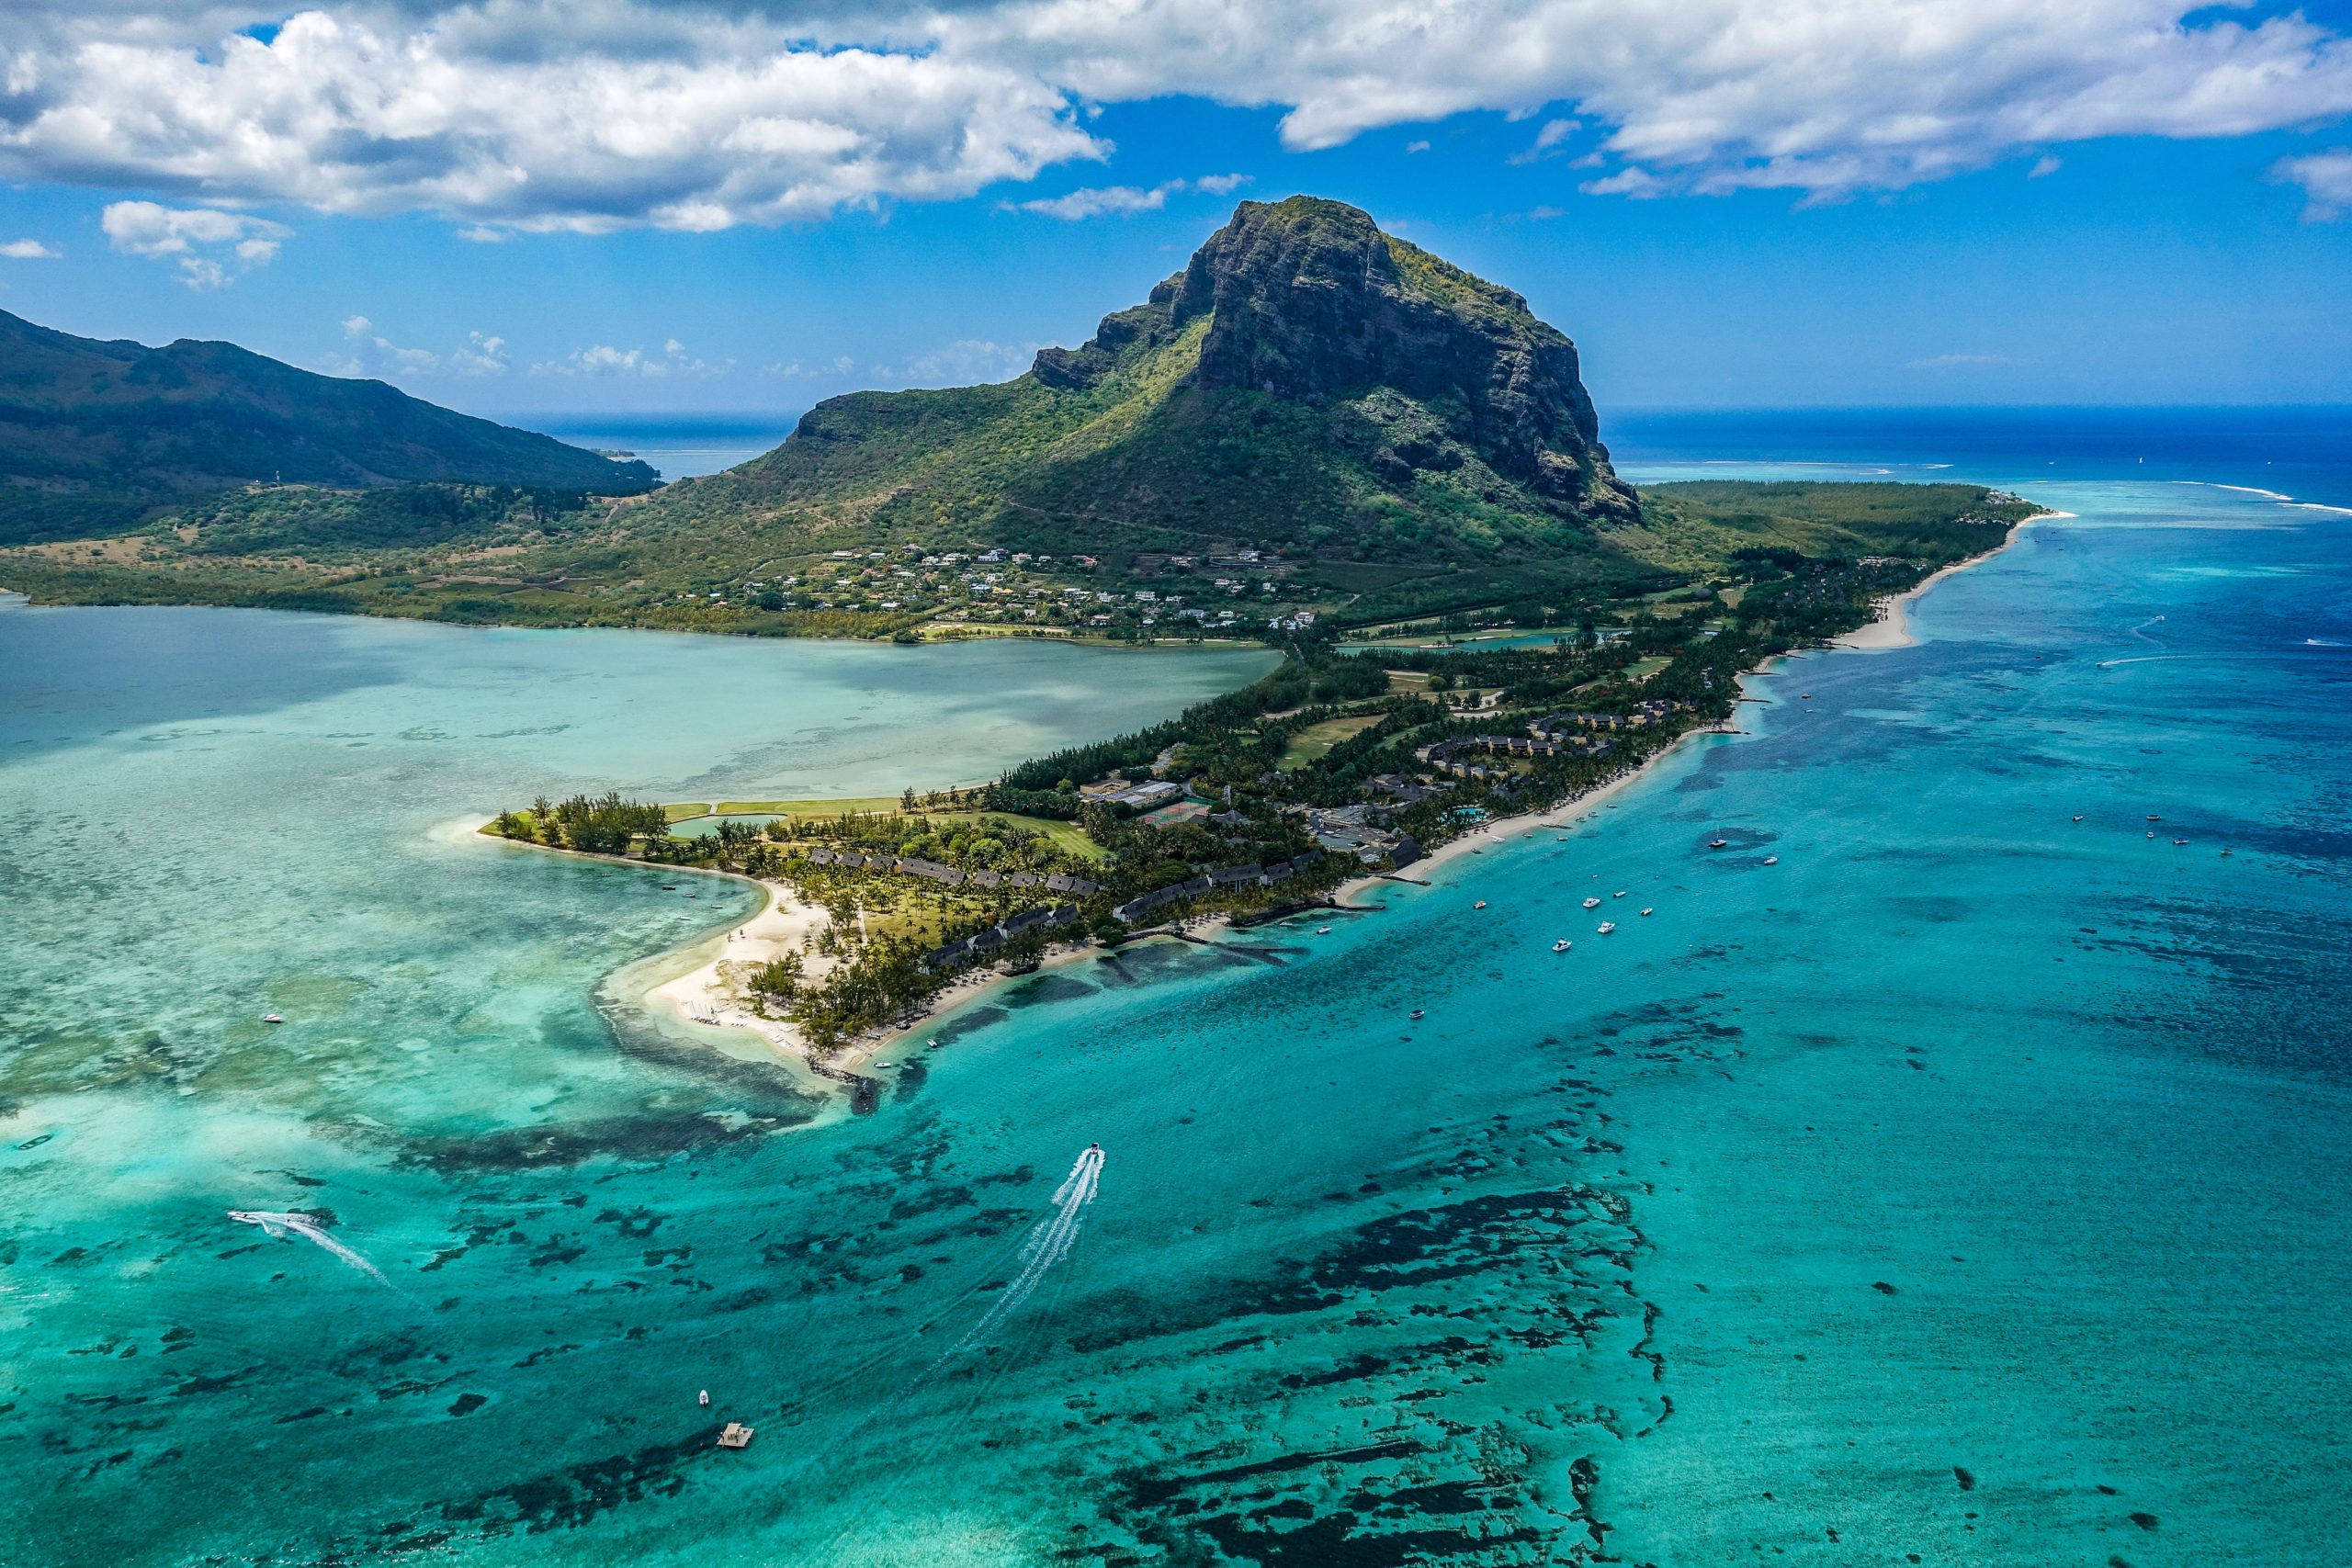 An aerial view of Mauritius Island, with bright blue water